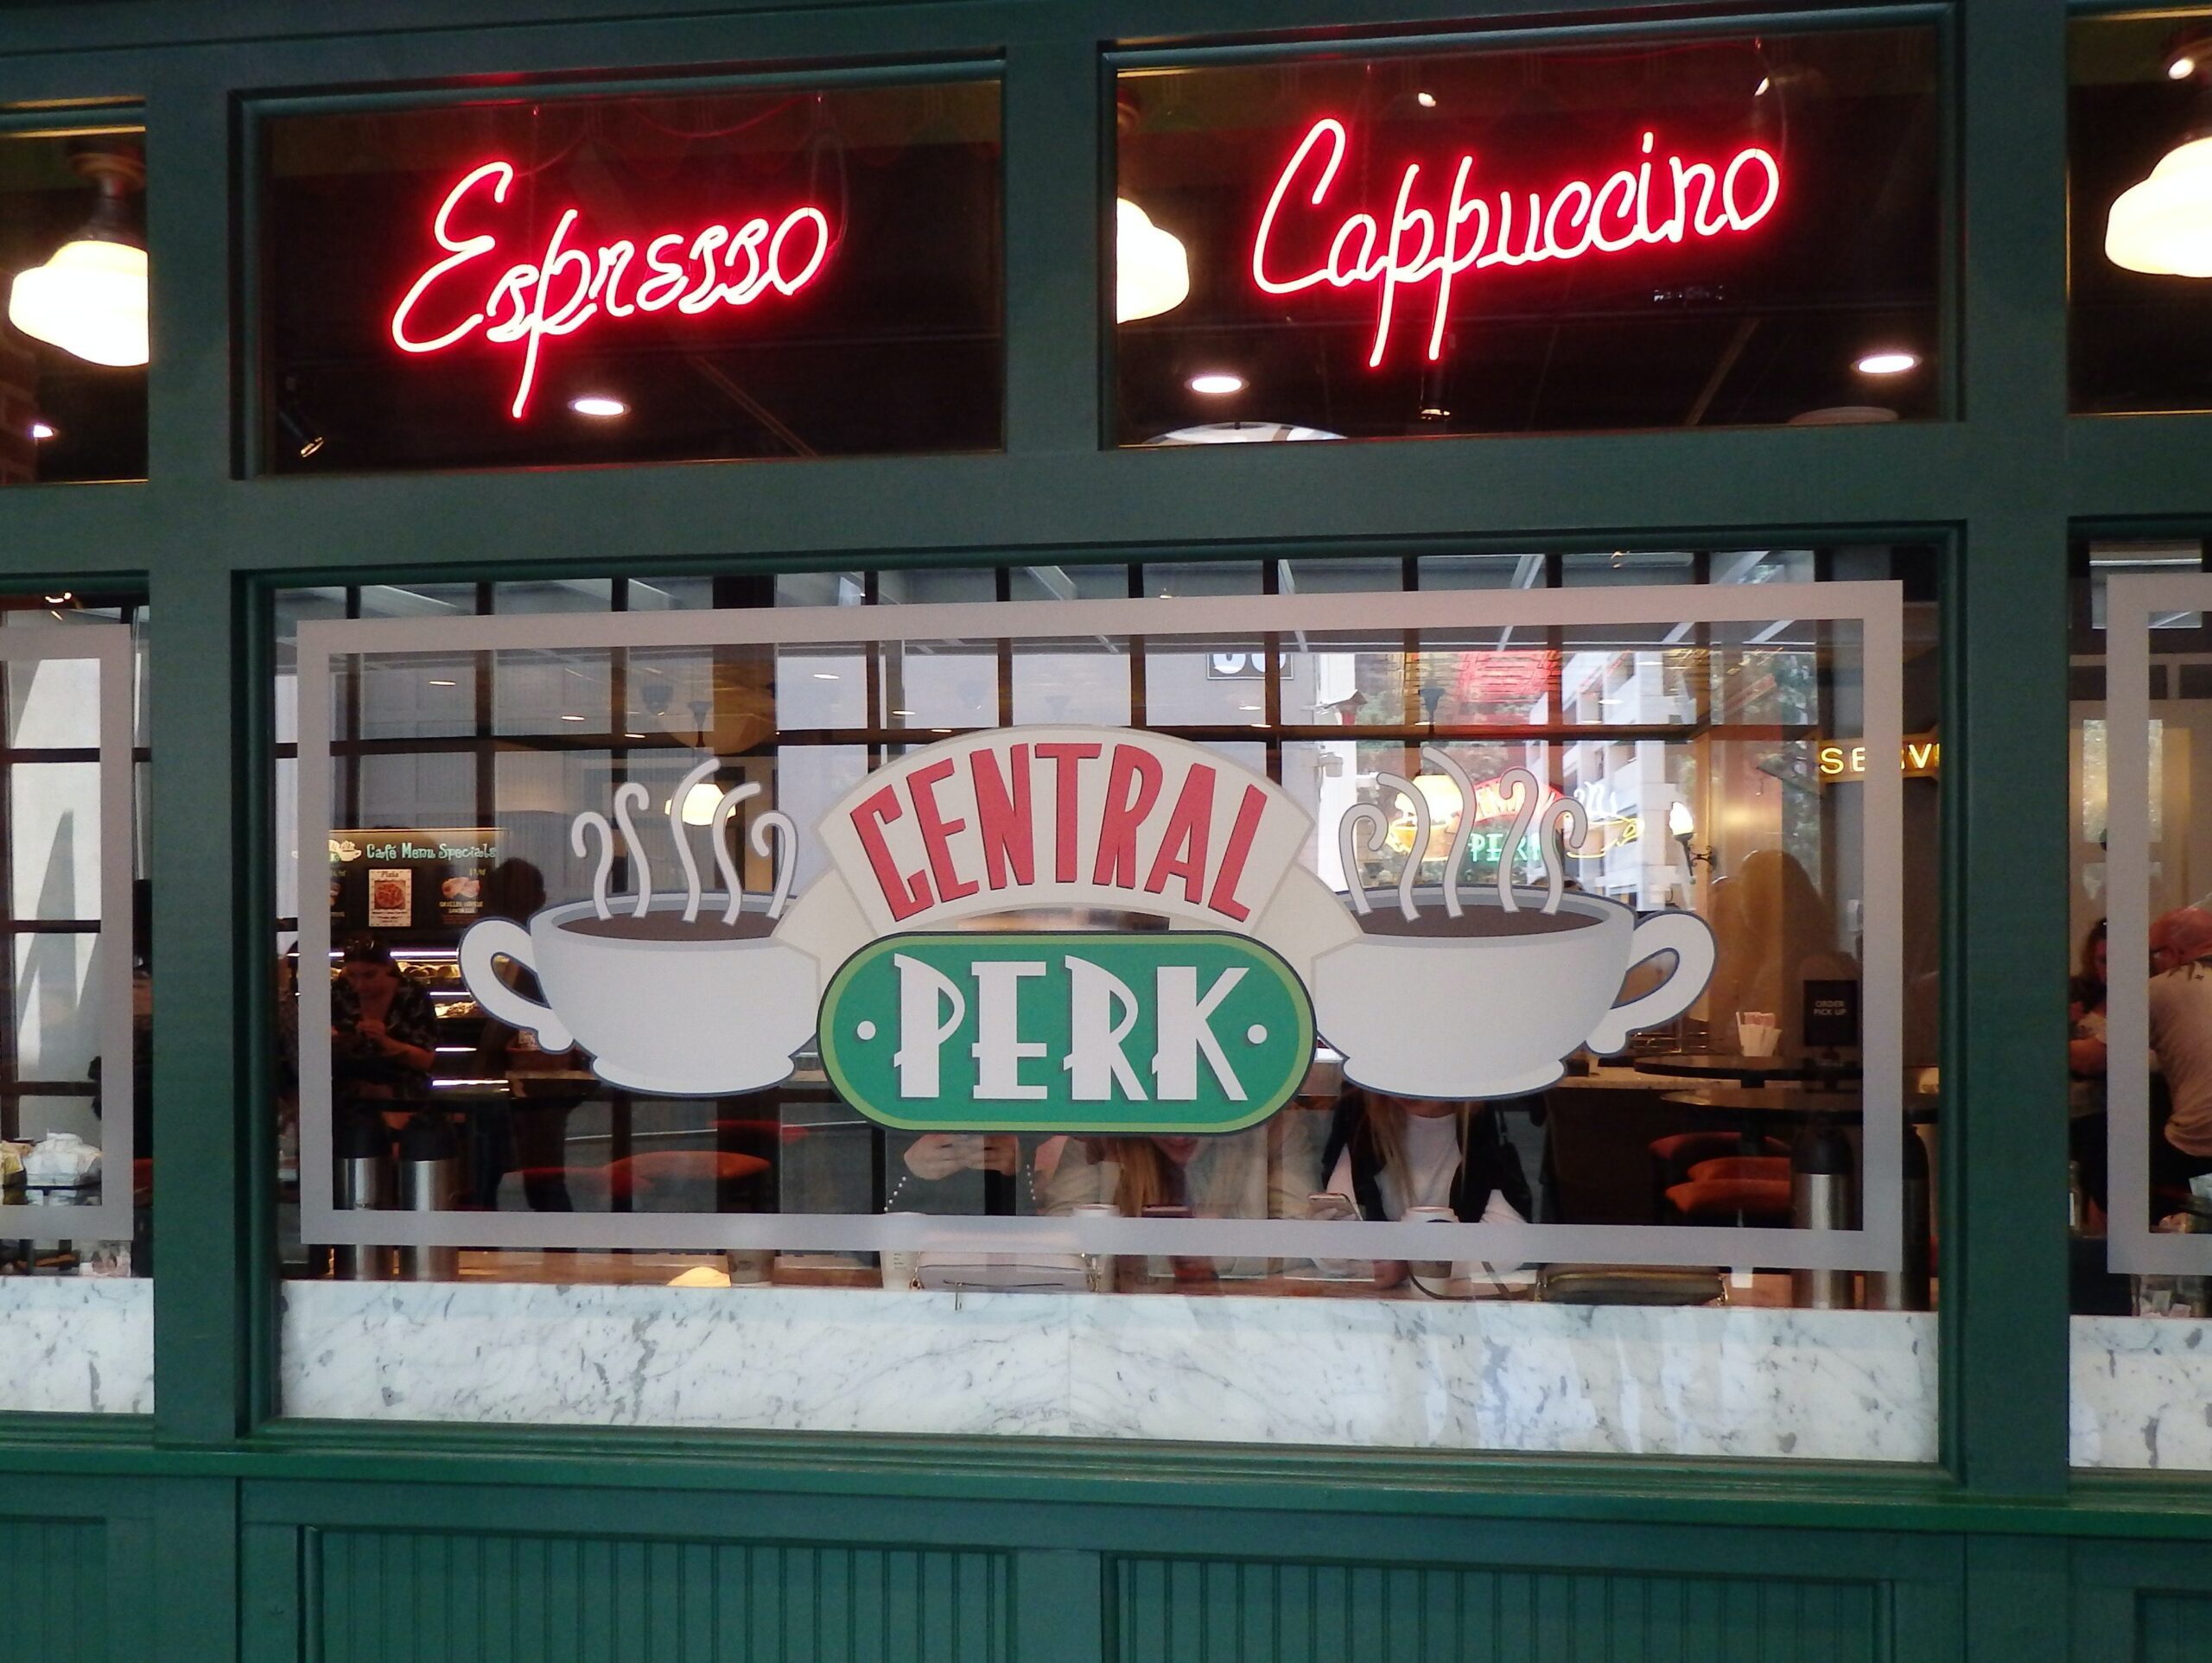 Central Perk from the series Friends